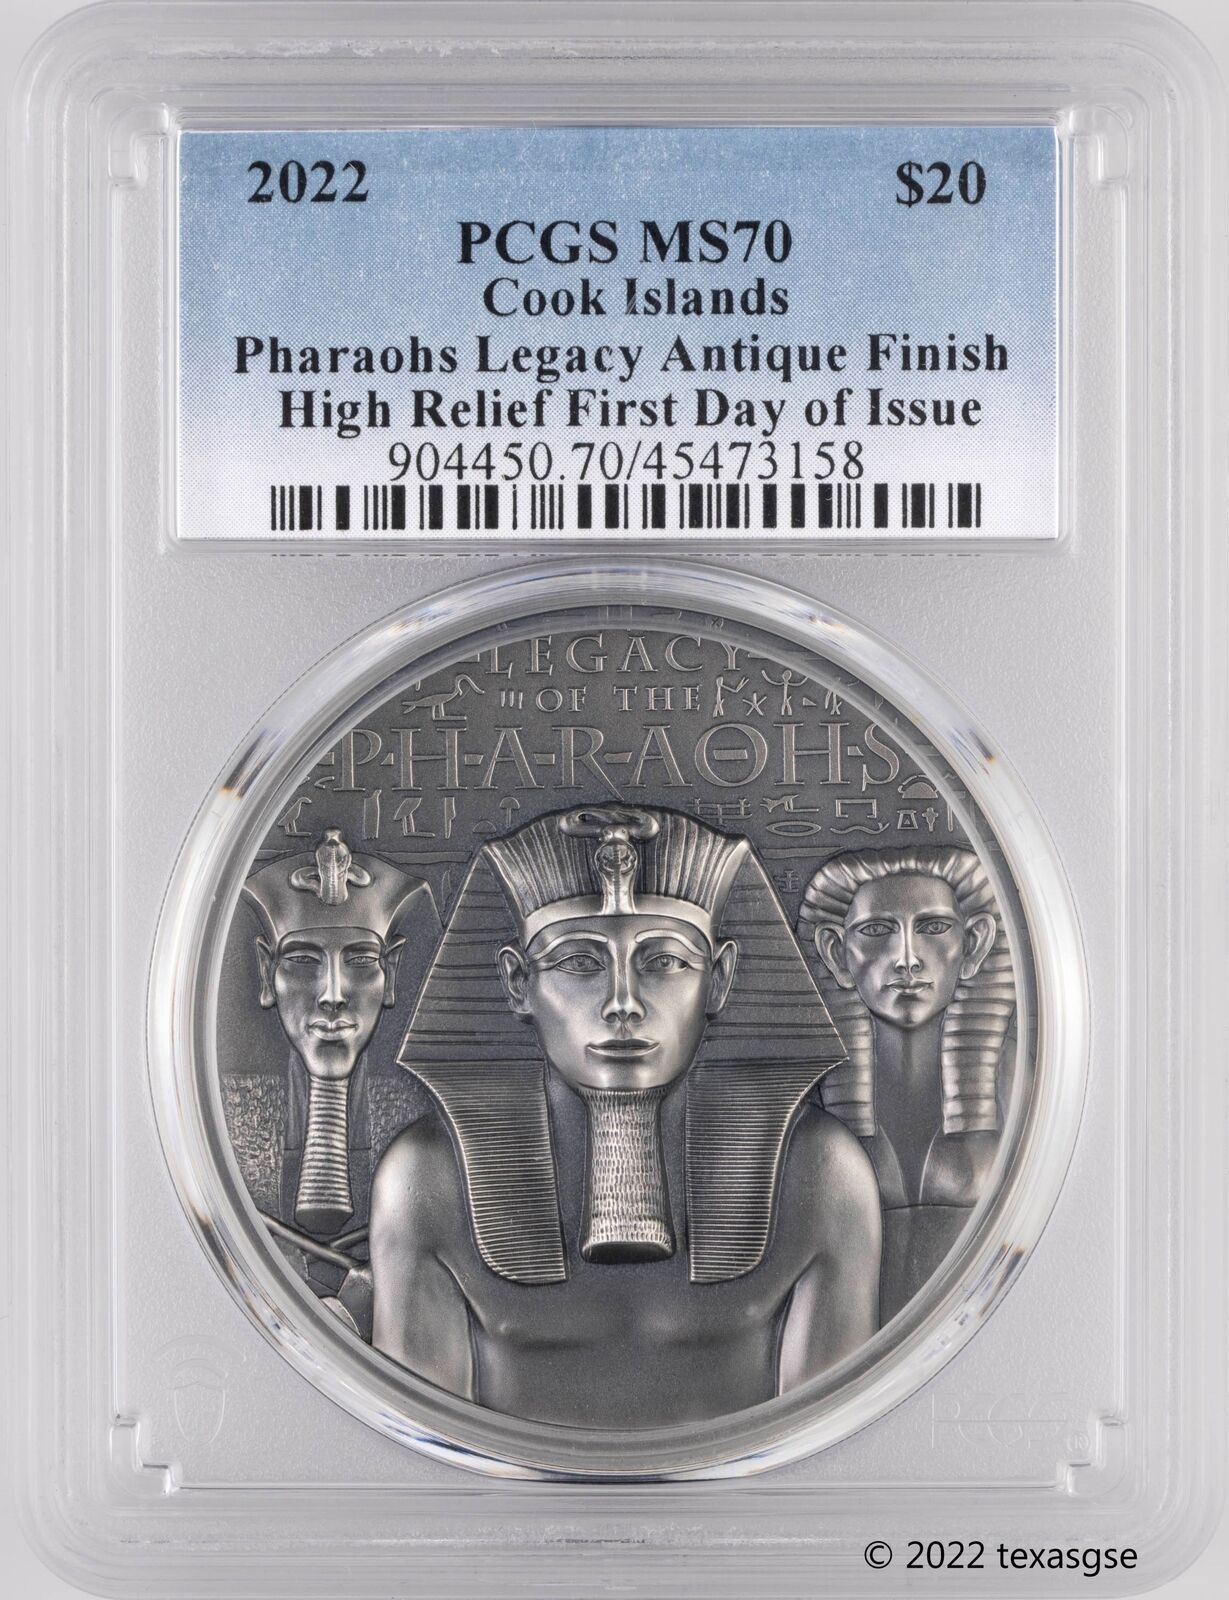 2022 Cook Islands 3oz HR Antique Silver Legacy of the Pharaohs FDI - PCGS MS70